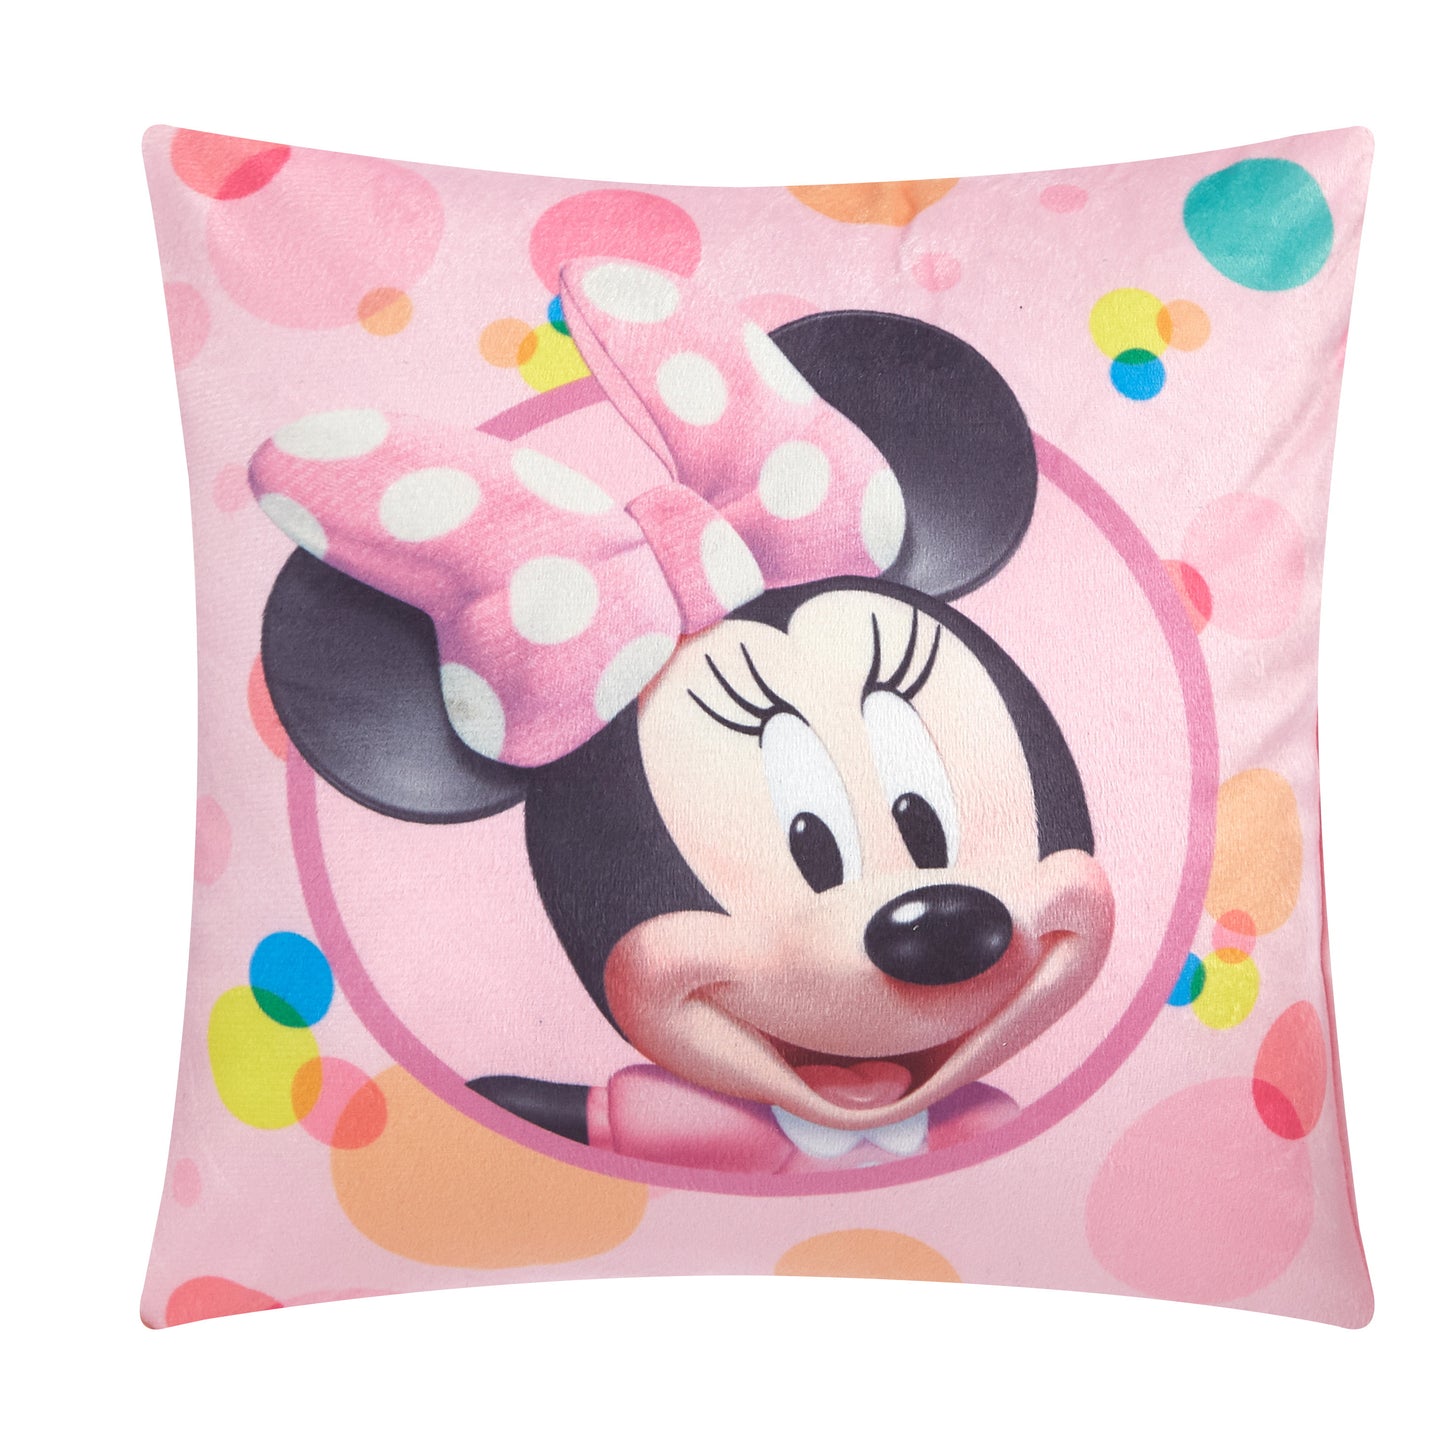 Disney Minnie Mouse 3 Piece Tent Set (Tent Set with Pillow and Flashlight)